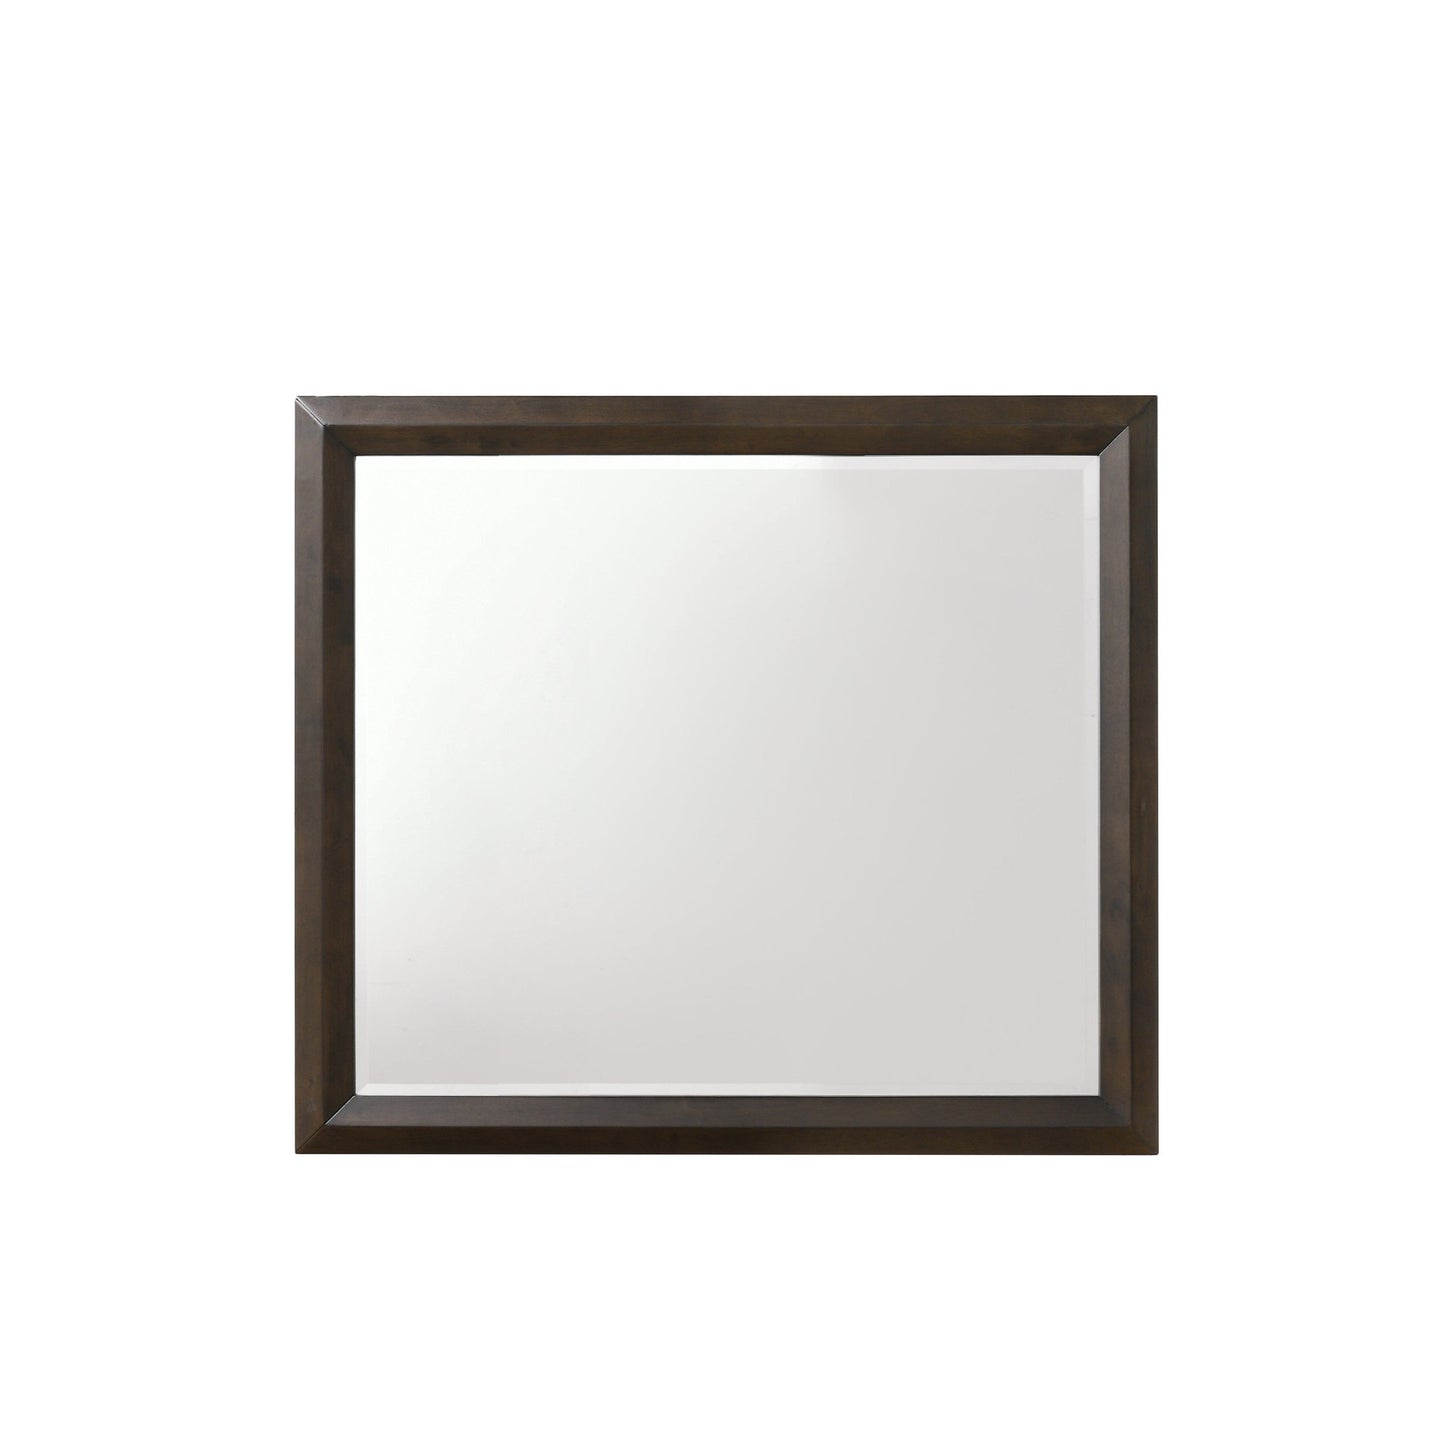 Benzara Brown and Silver Transition Style Wooden Mirror With Rectangular Shape